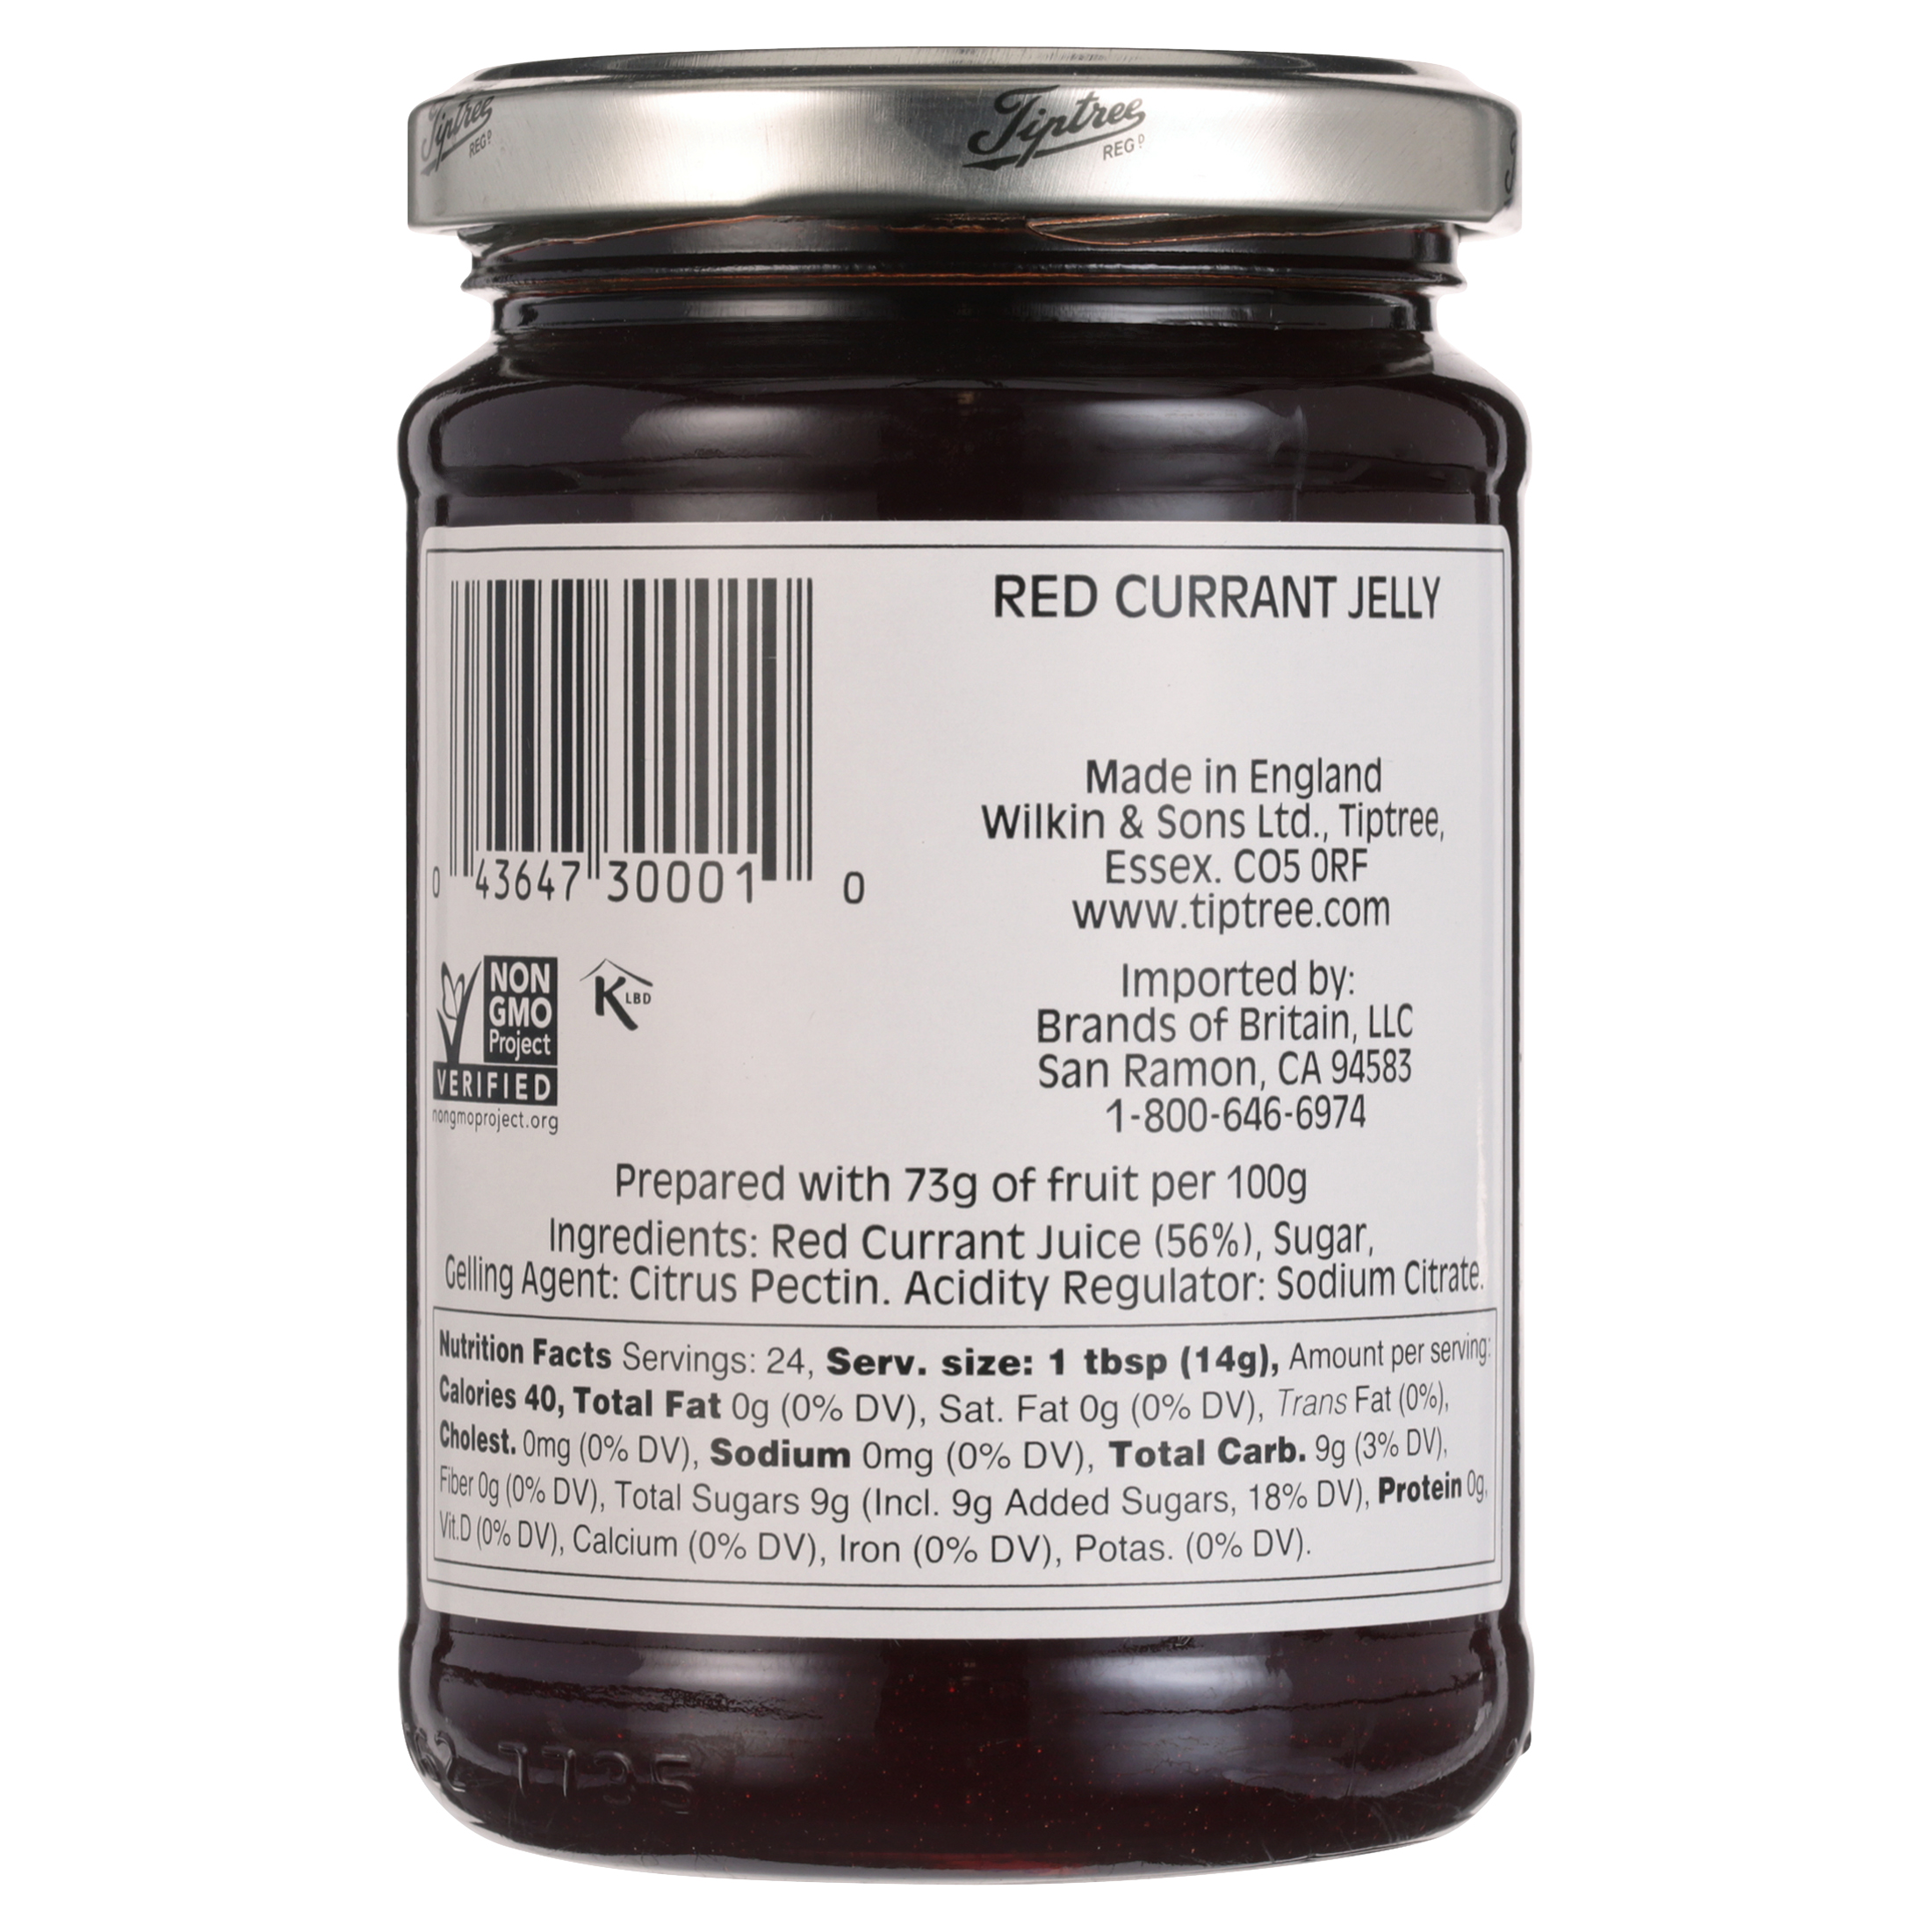 Tiptree Red Currant Jelly, 12 Ounce Jar - image 2 of 8